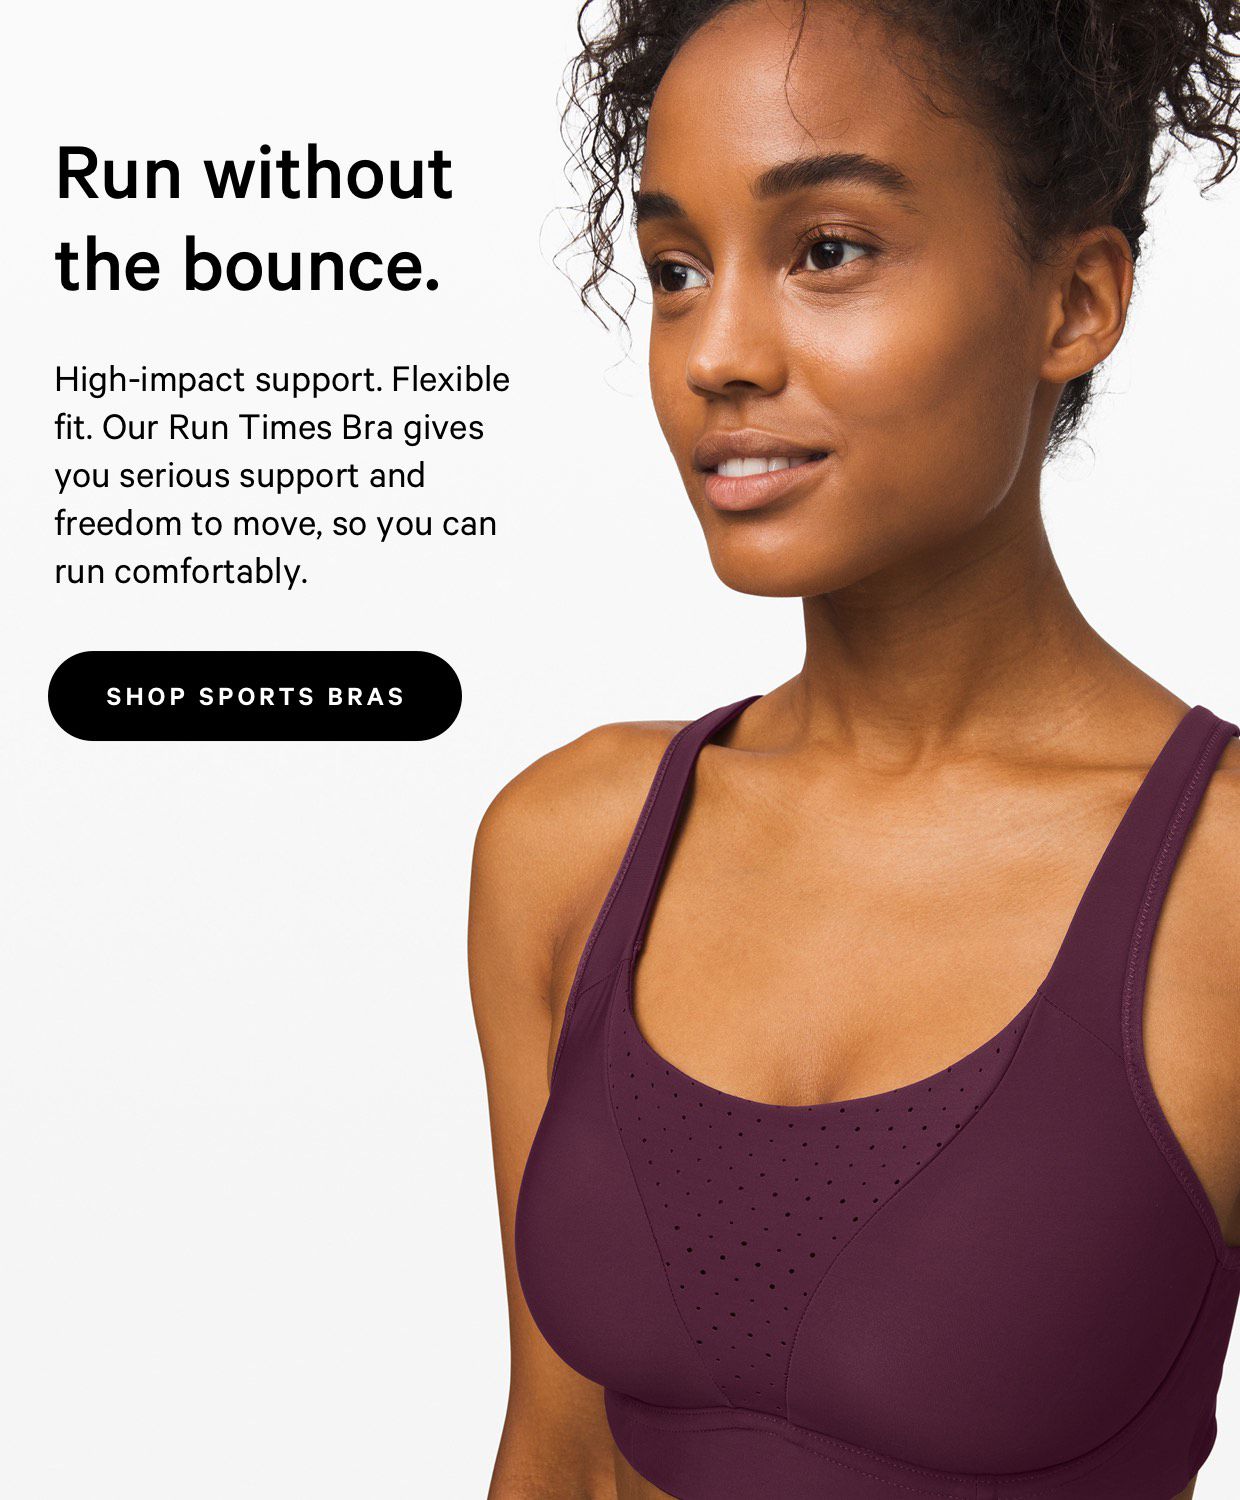 It's what you want in a running bra - lululemon Email Archive